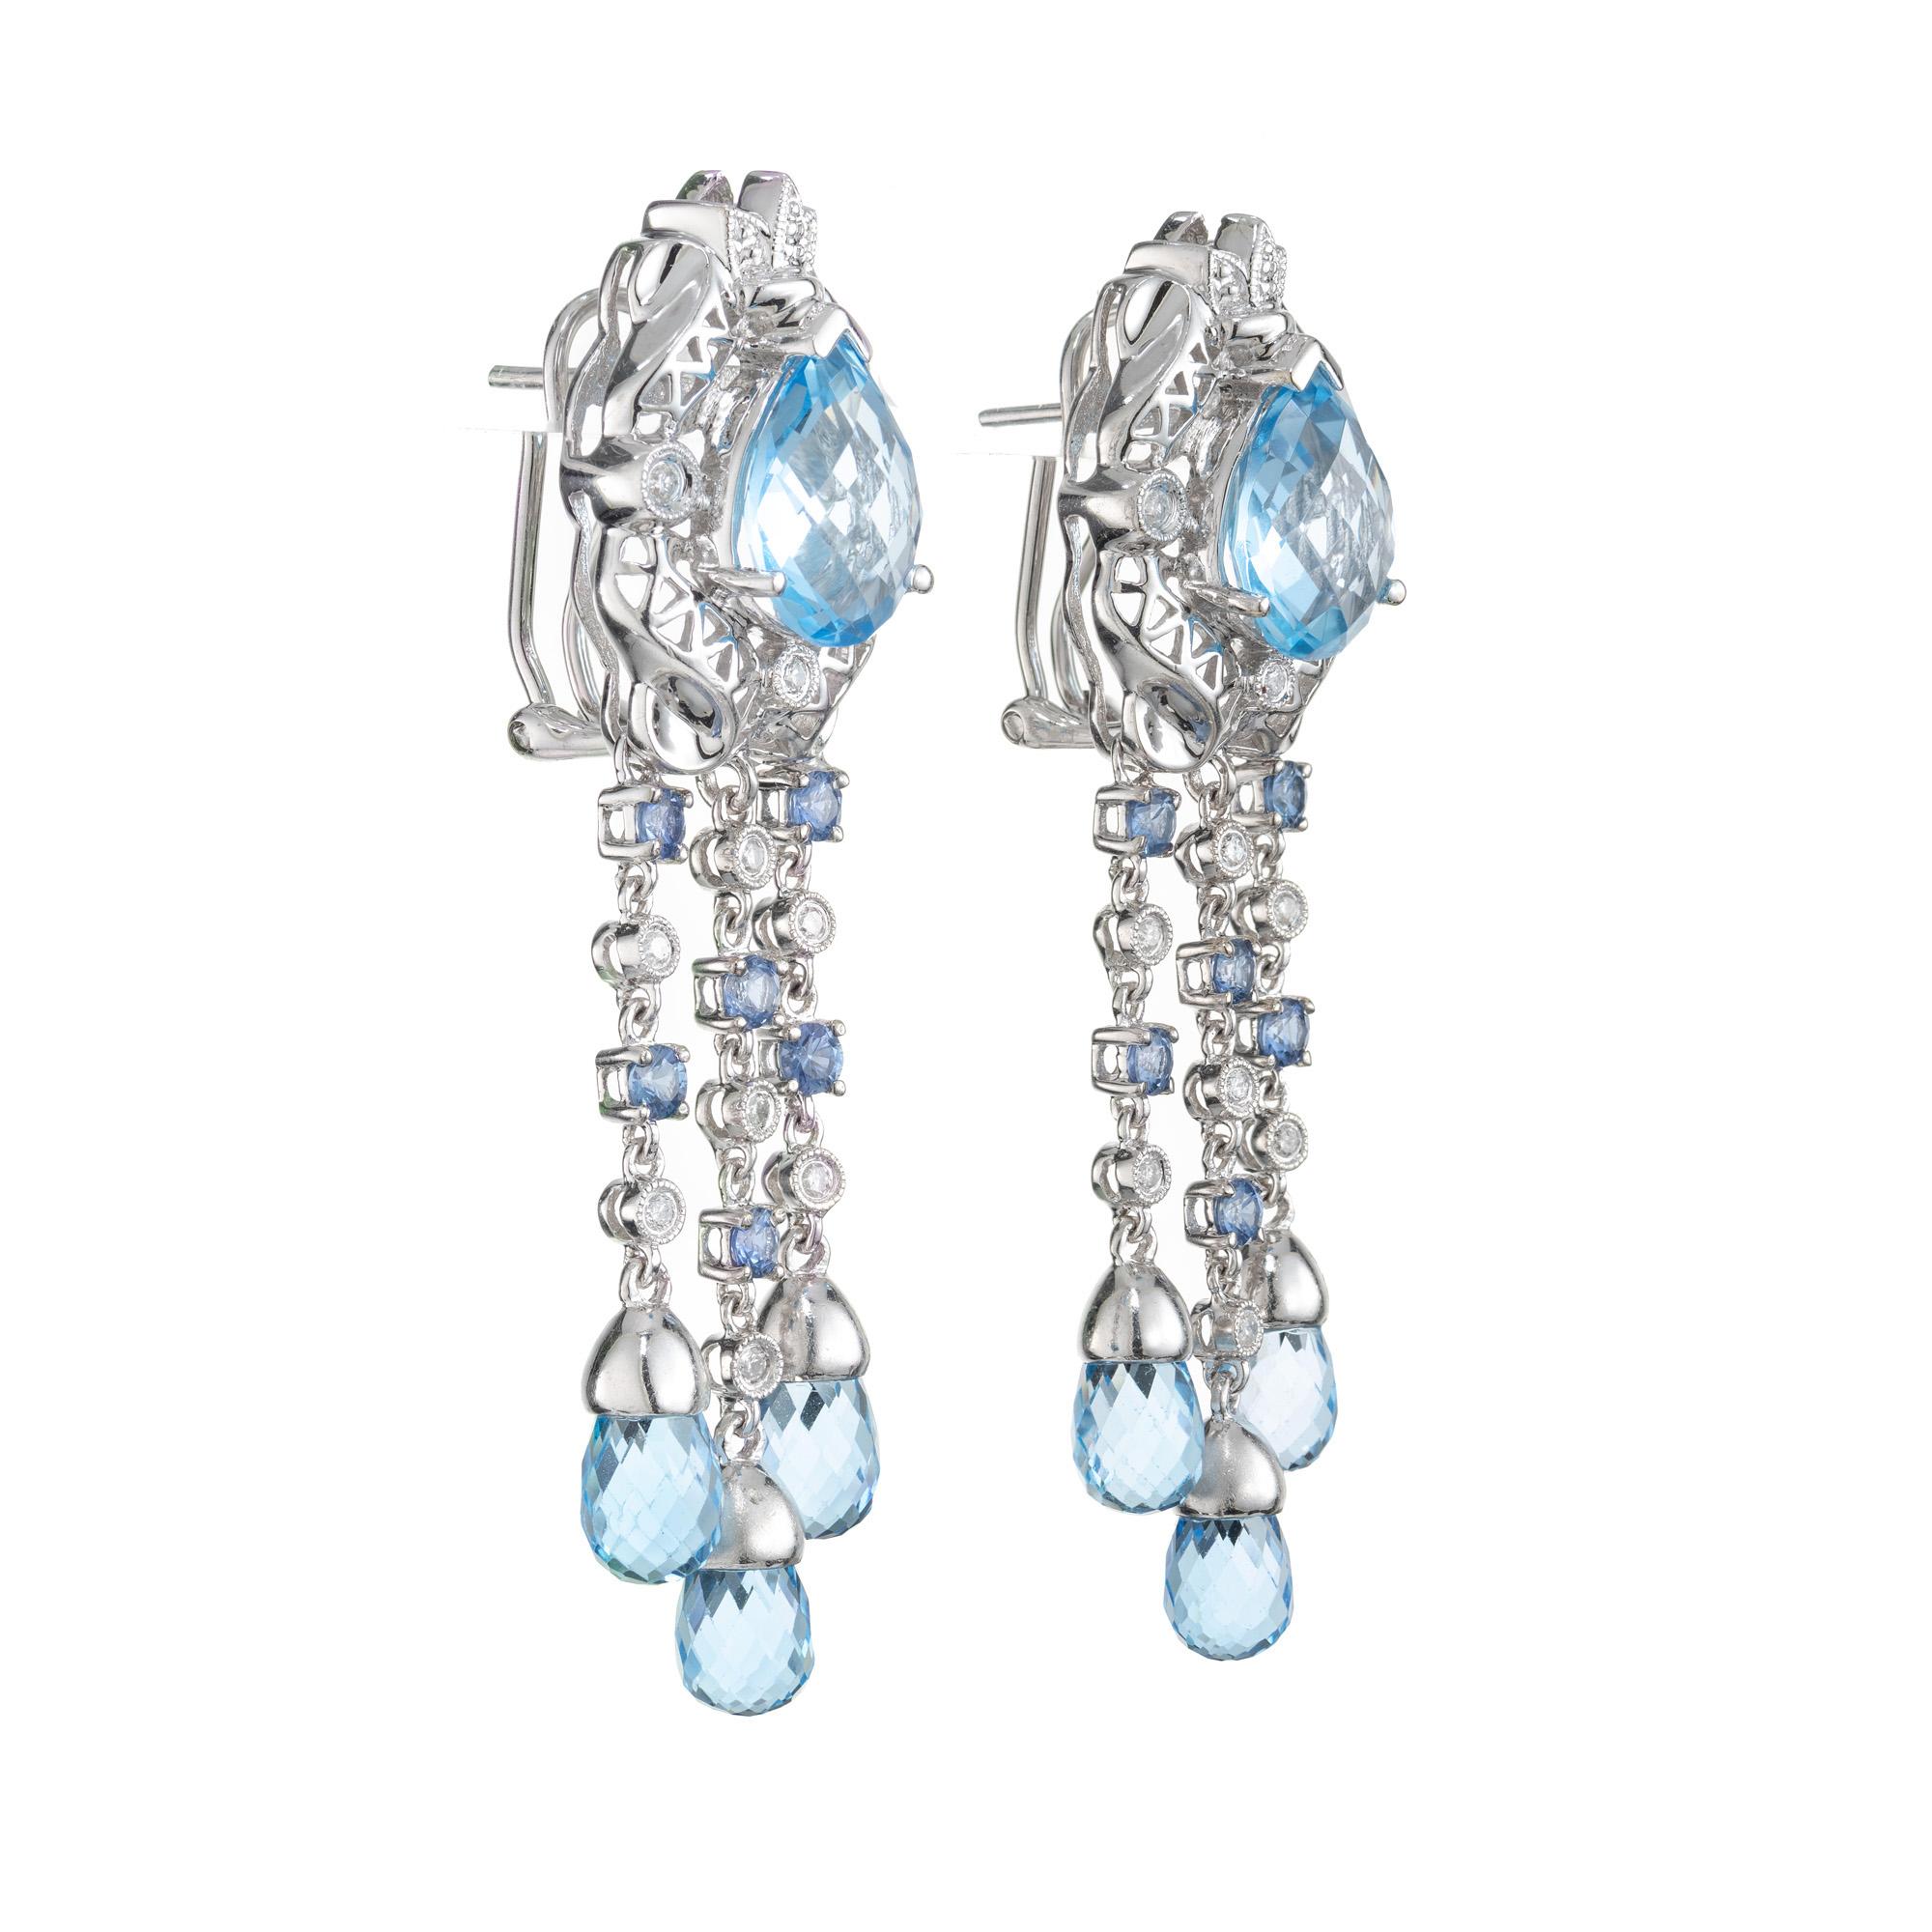 Crafted to perfection, these dangle earrings feature stunning blue topaz gemstones beautifully accentuated by dazzling diamonds and sapphires, in 14k white gold settings. At the center of each of these earrings are a pair of 2.50ct pear shaped